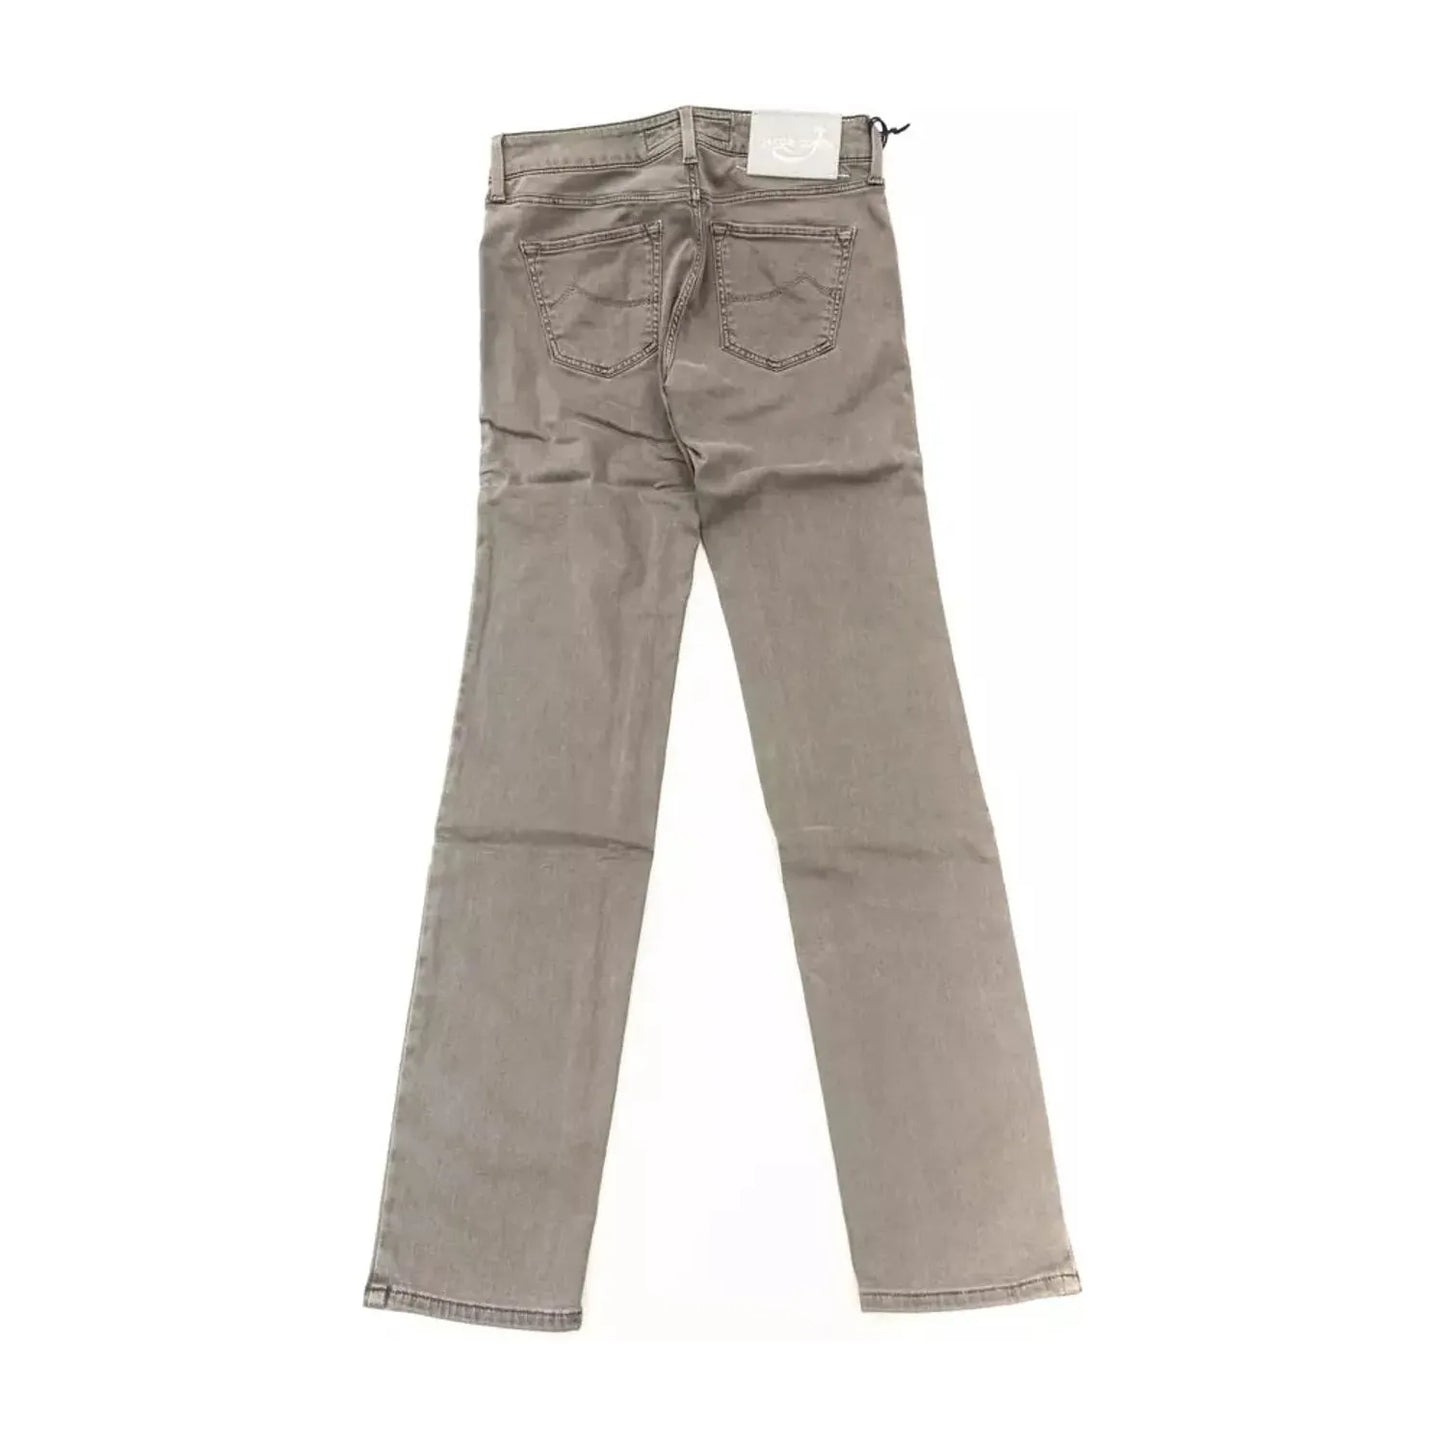 Jacob Cohen Chic Vintage-Inspired Gray 5-Pocket Jeans gray-modal-jeans-pant